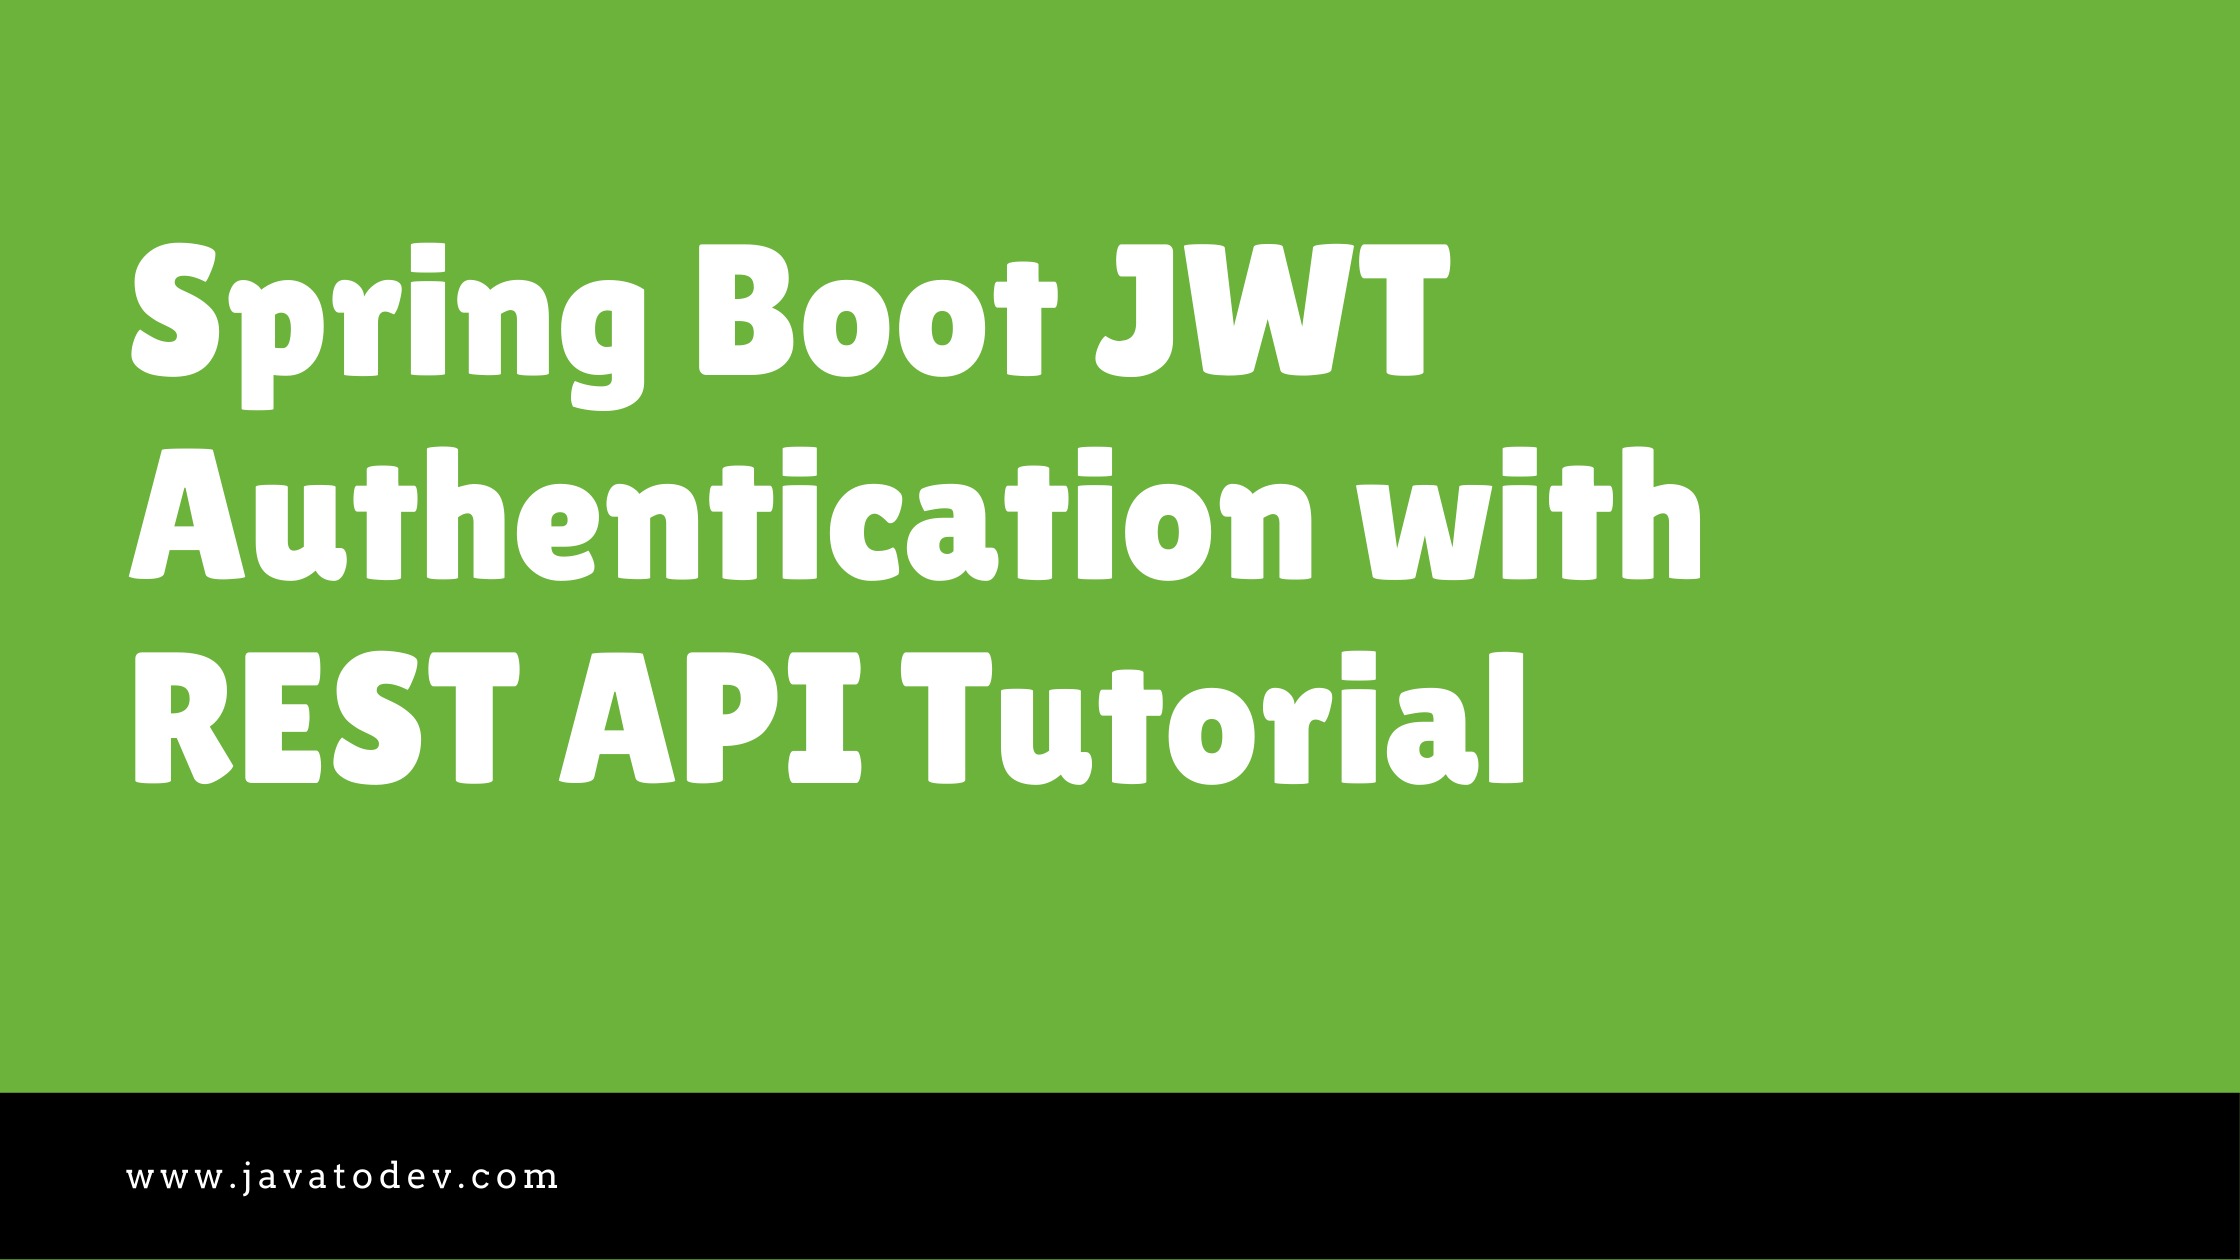 Spring Boot JWT Authentication using Spring Security